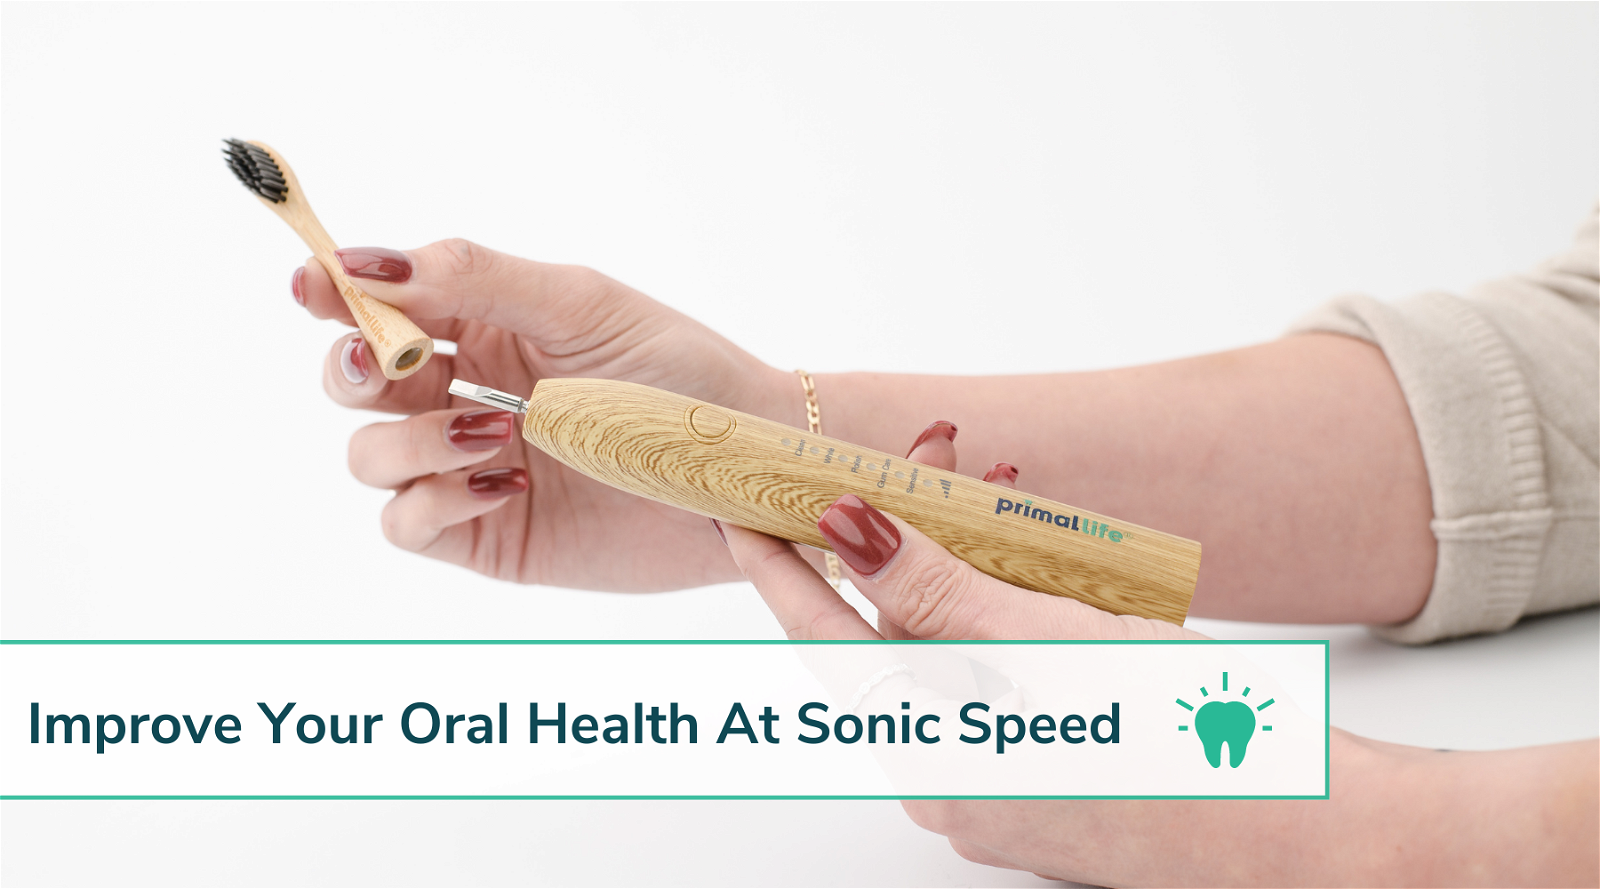 Real White Sonic Toothbrush